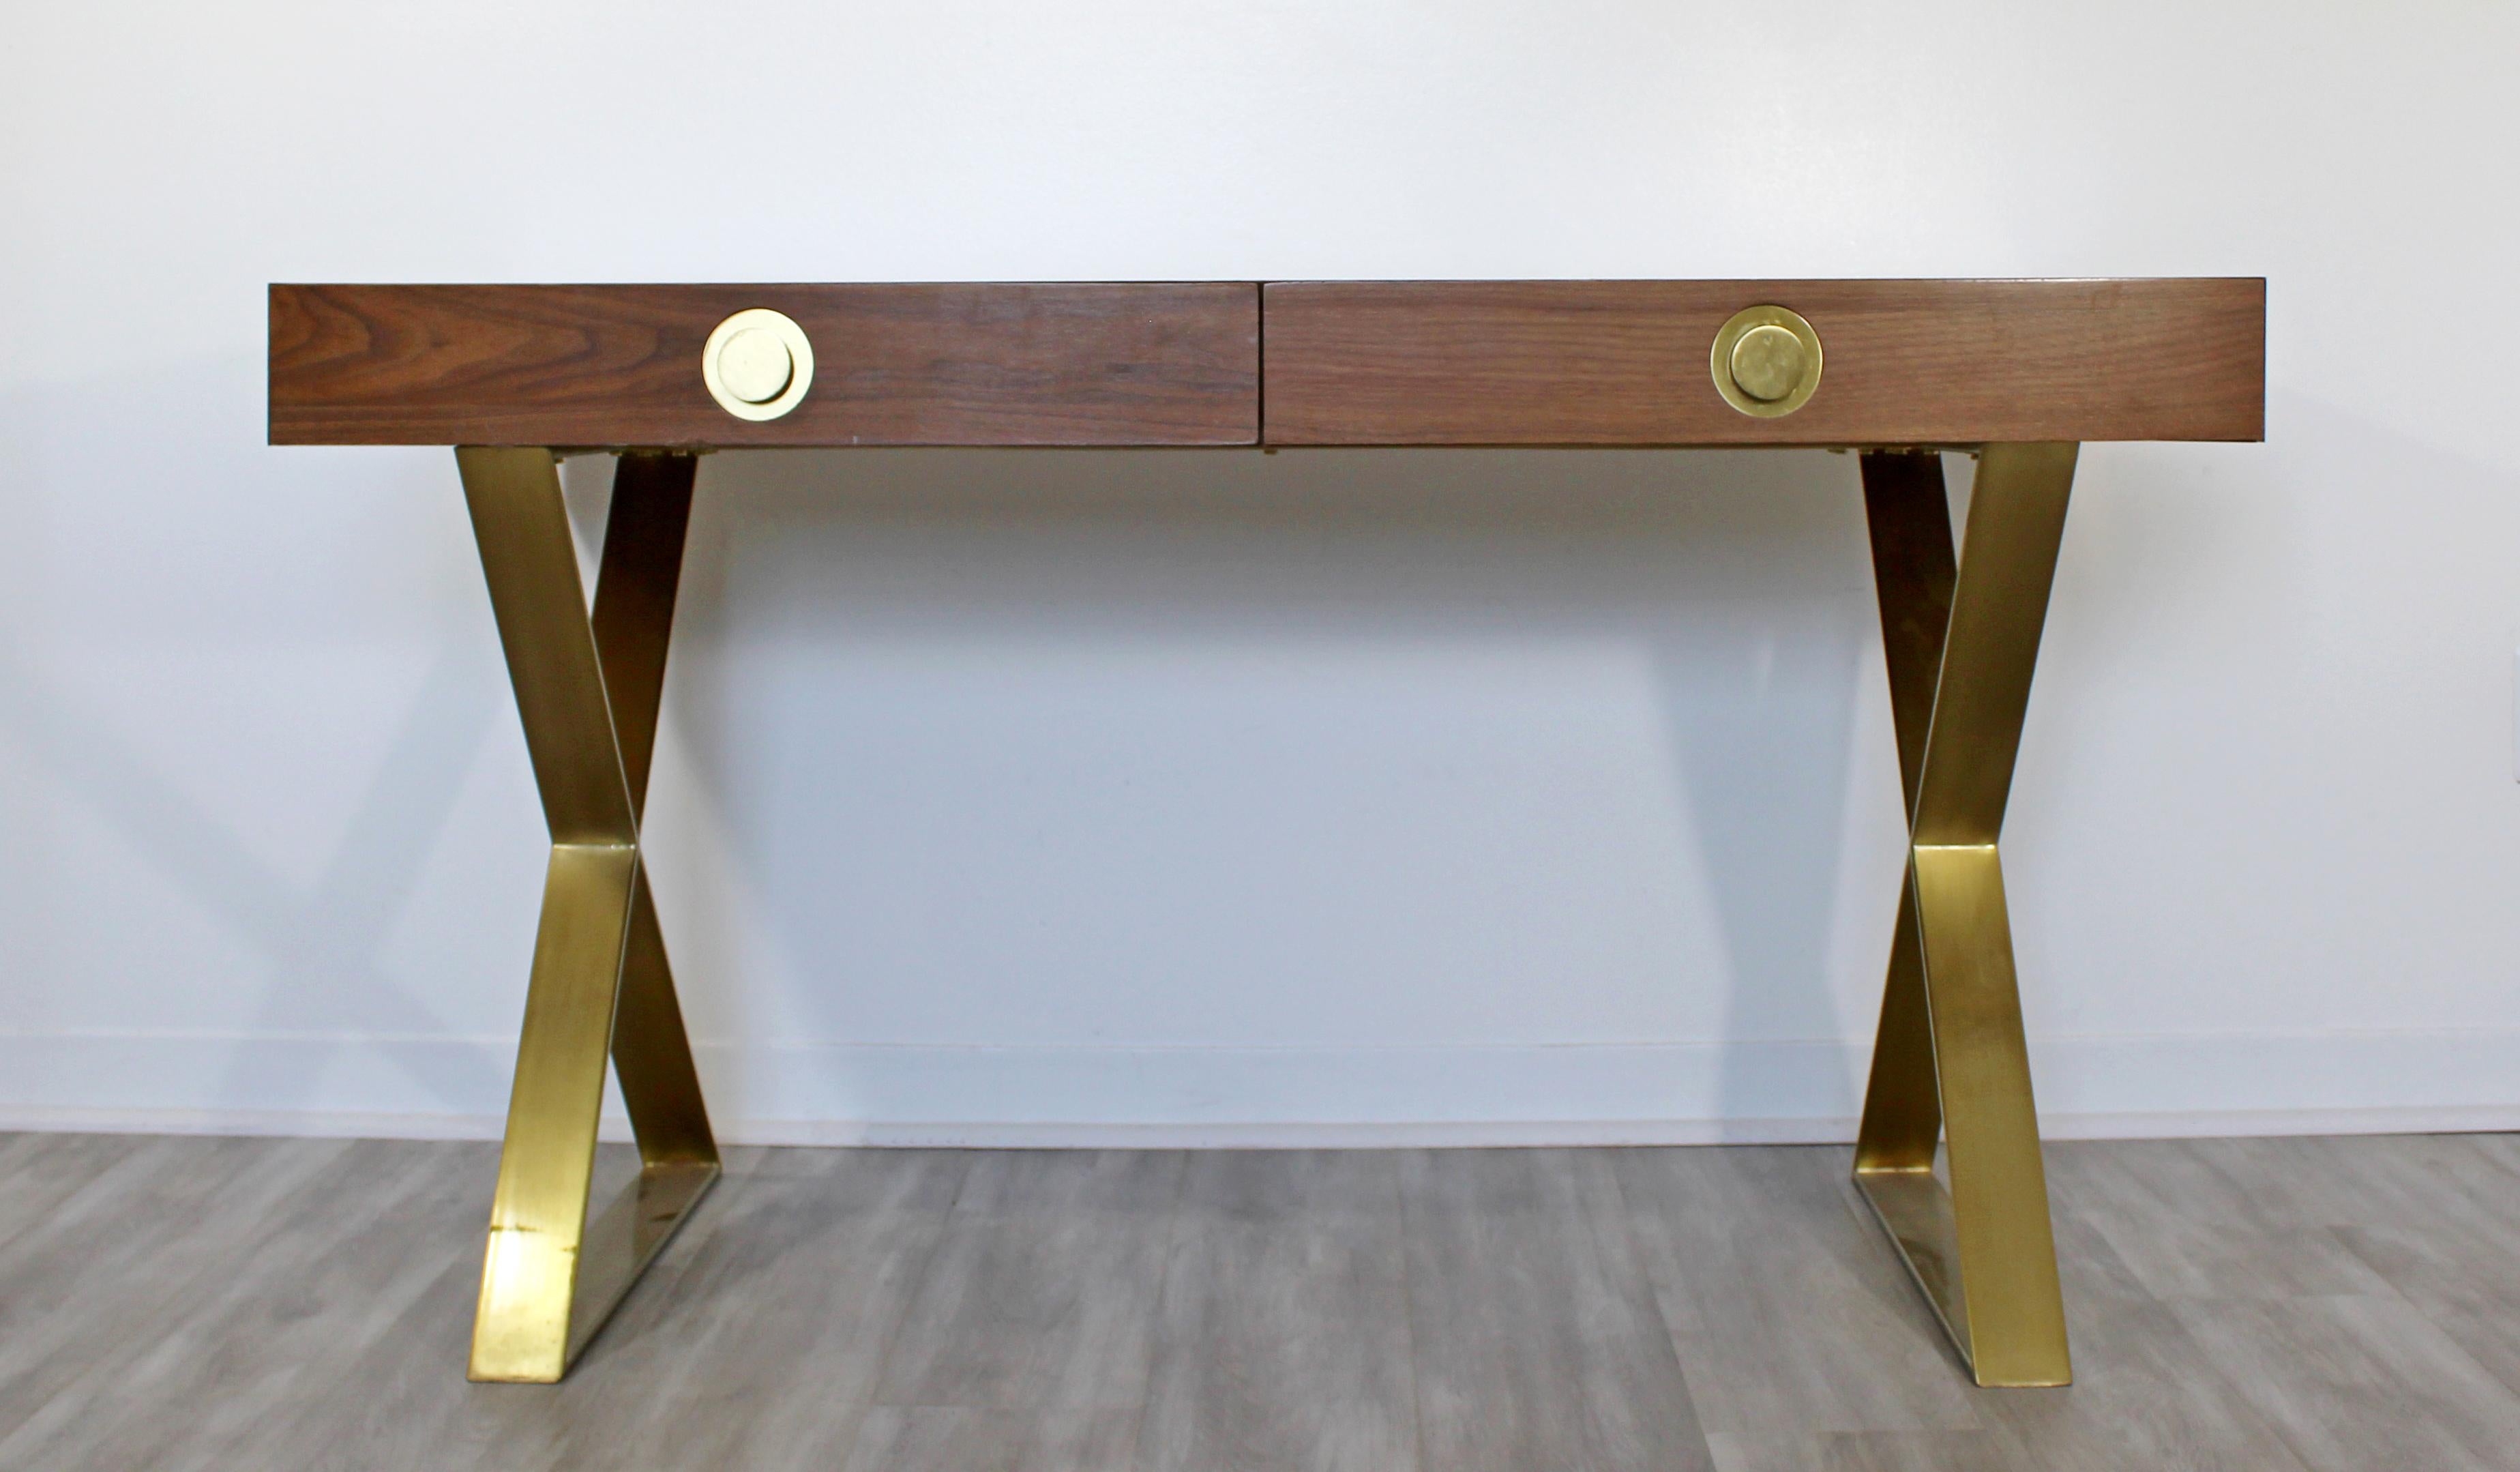 For your consideration is a beautiful, campaign desk, on brass X bases and with brass pulls, by Jonathan Adler, in the style of Milo Baughman. In good condition. The dimensions are 54